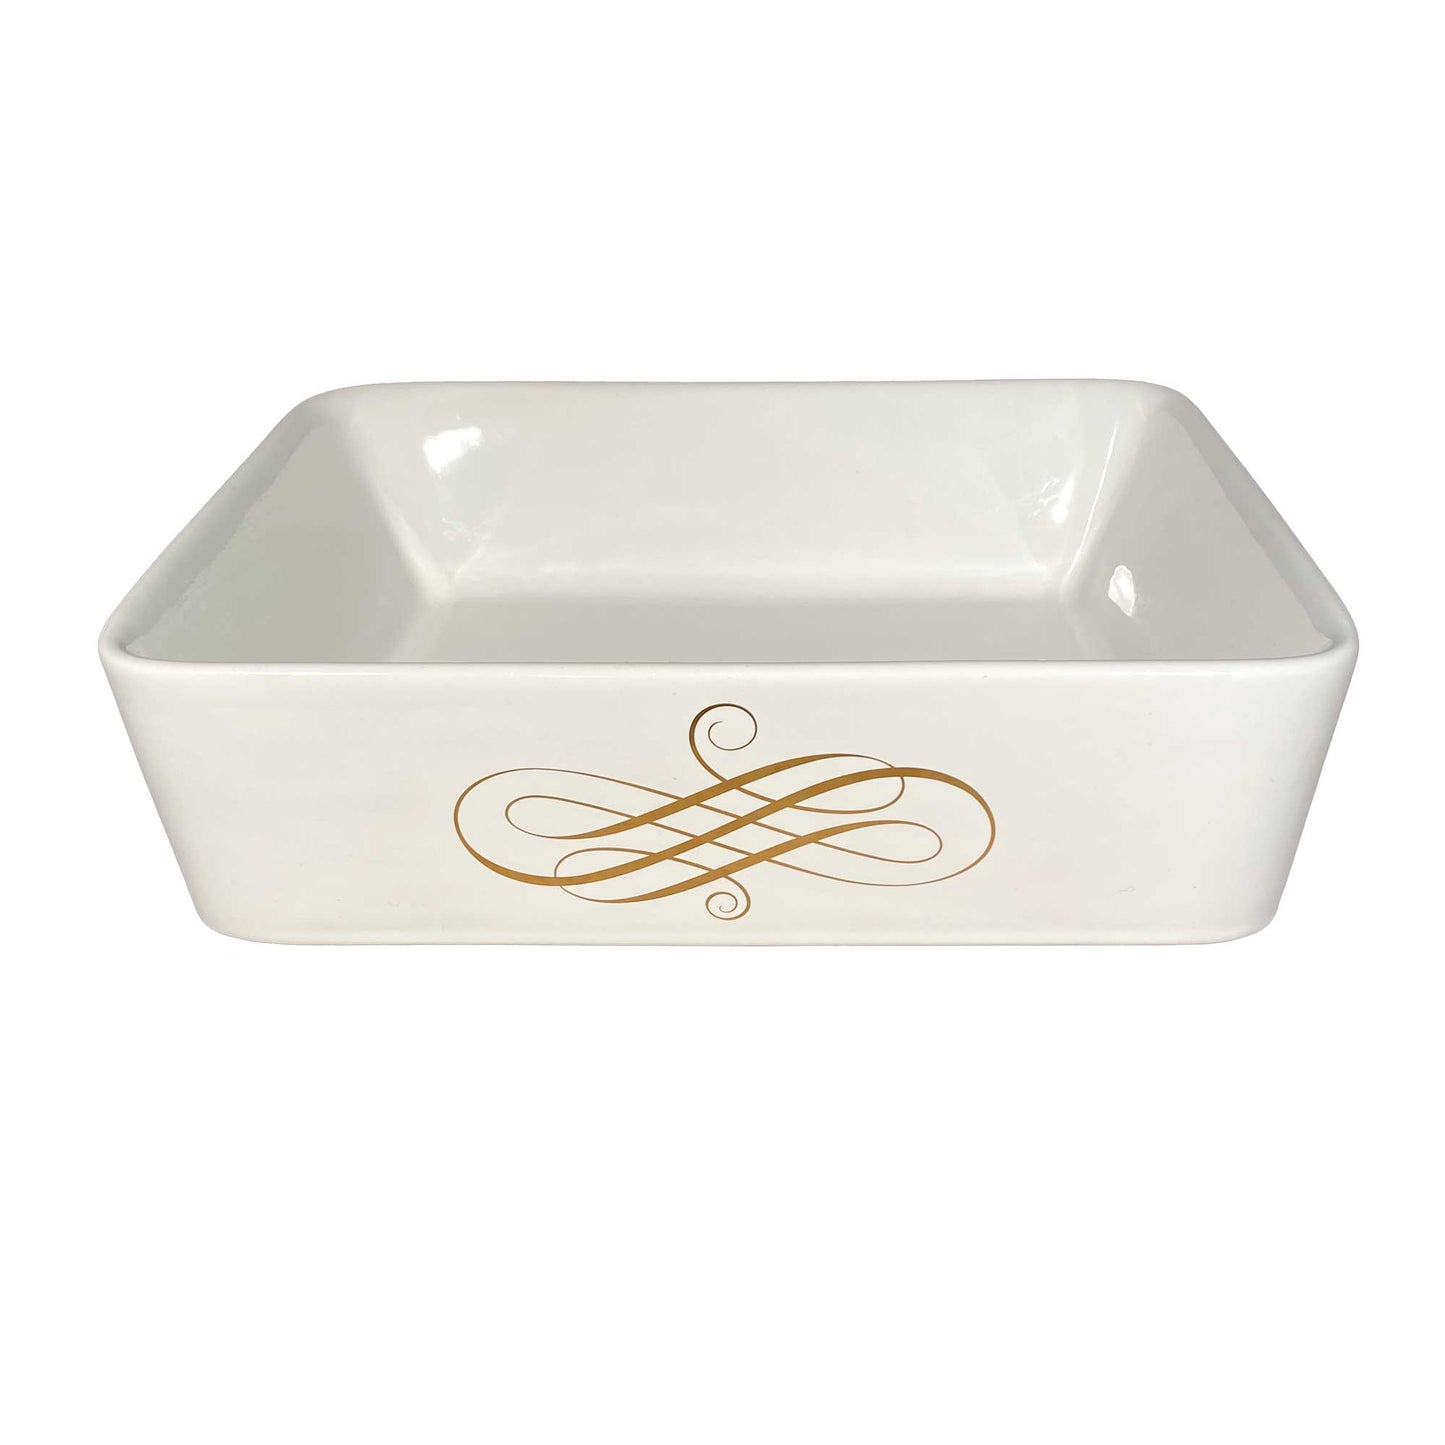 Elegant swirl painted in gold on a white rectangle vessel sink